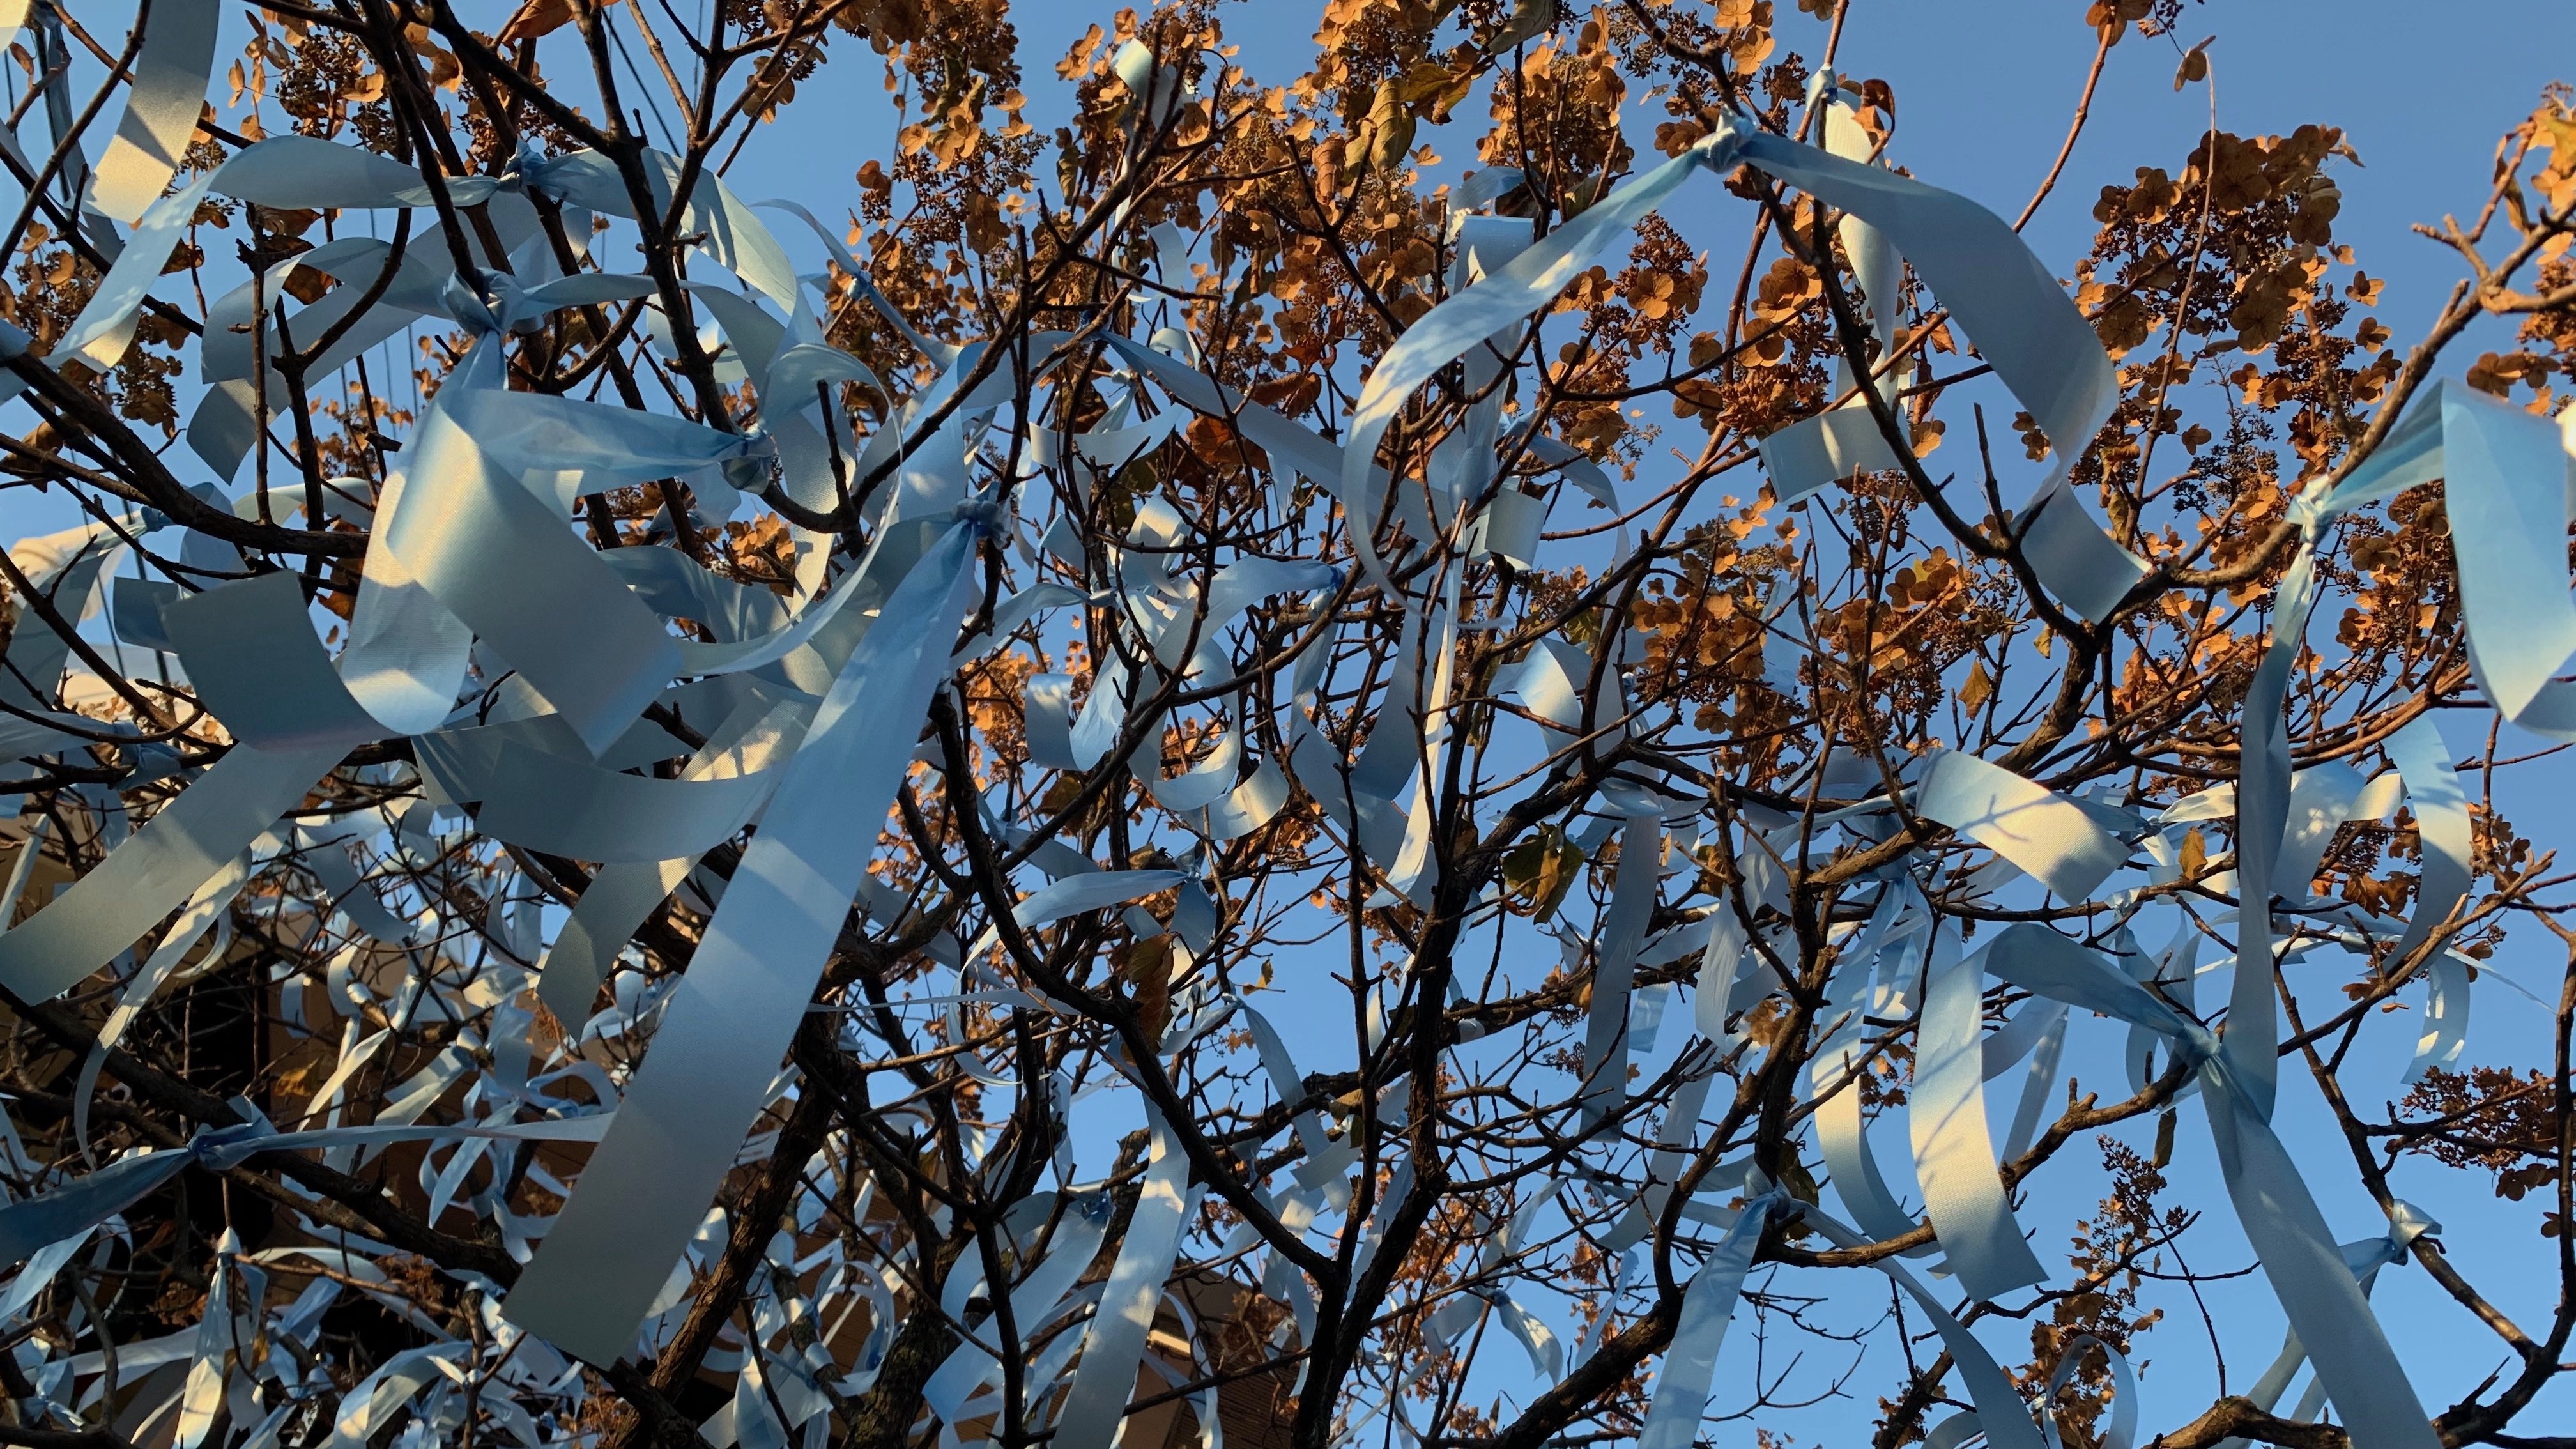 Blue ribbons tied on tree branches. Looking through the tree branches to the sky.